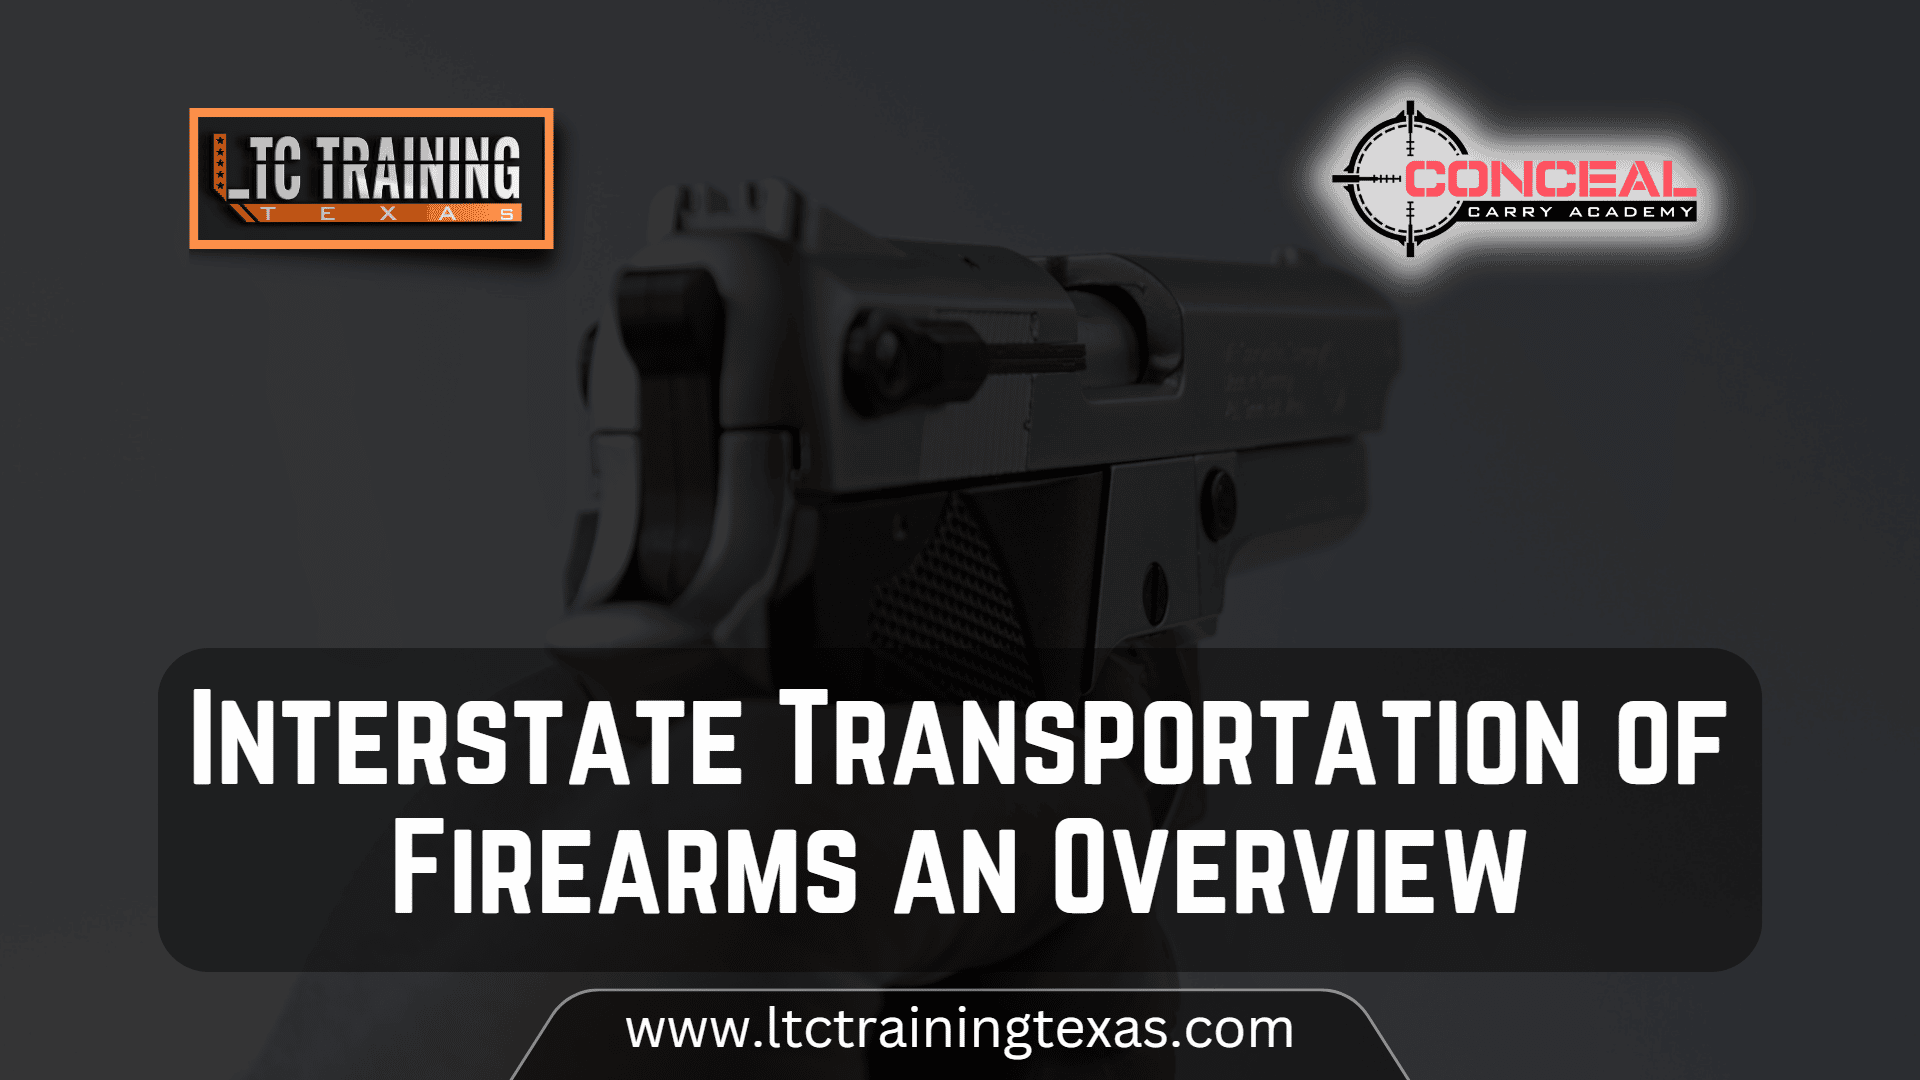 Interstate Transportation of Firearms: An Overview